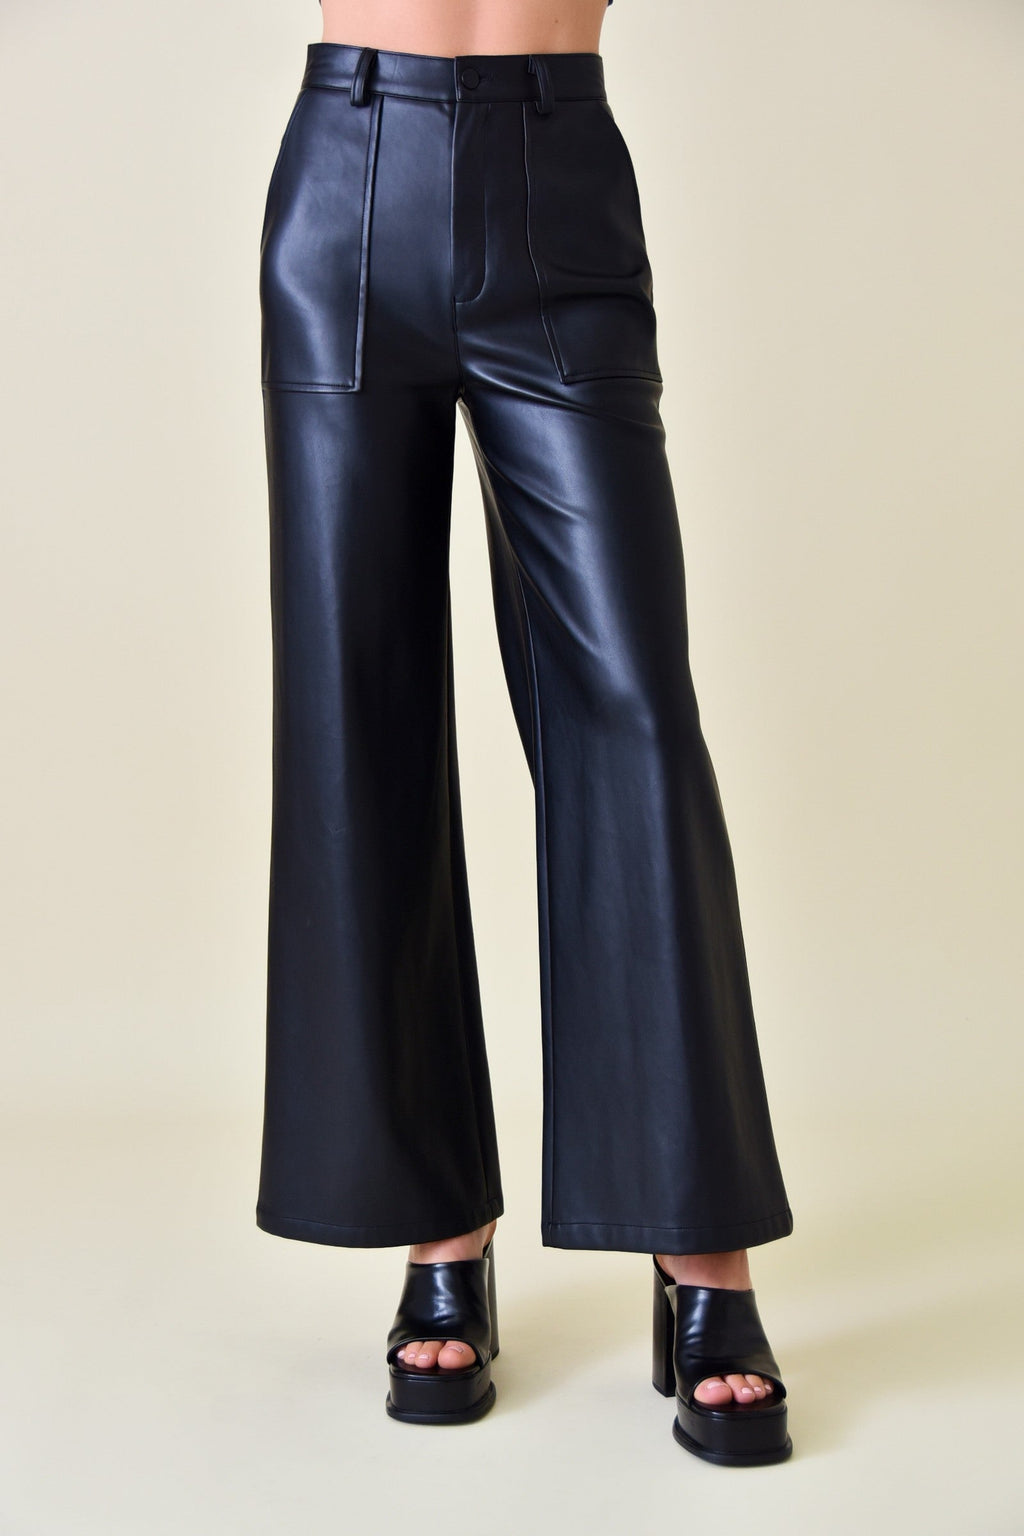 Womens High Waist PU Leather Pants Slim Fitted Flare Bootcut Pants Sexy  Stretchy Wide Leg Leather Pants Trousers Women Clothes 